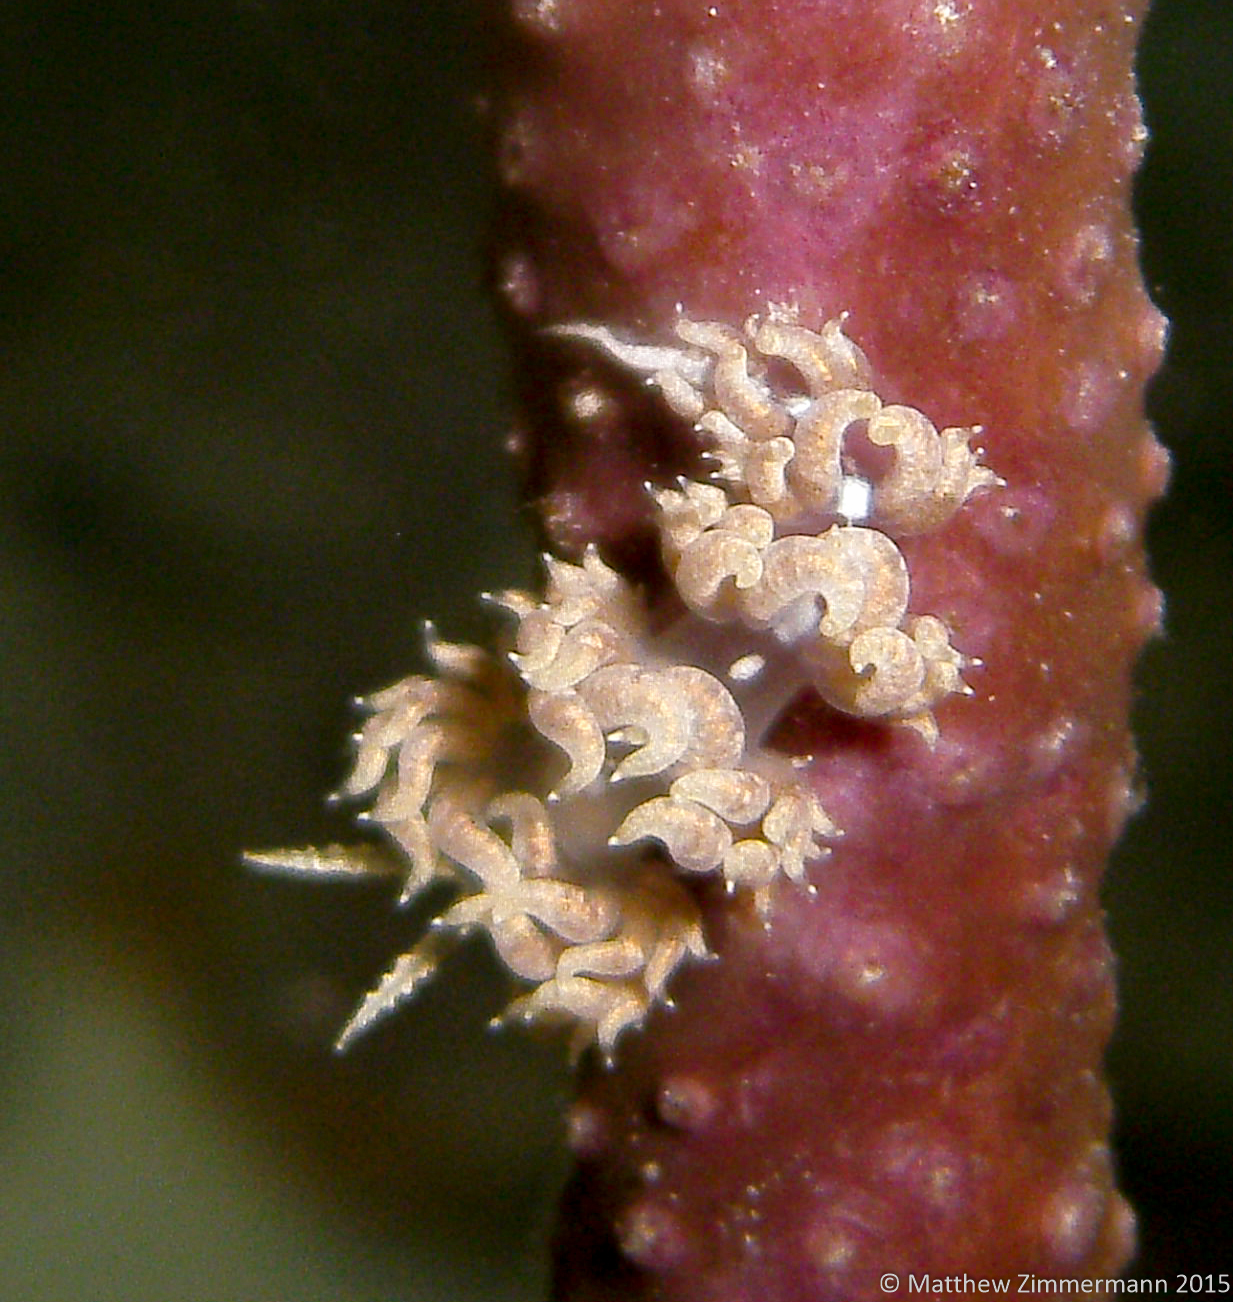 2807 White-Patch Aeolid Nudibranch